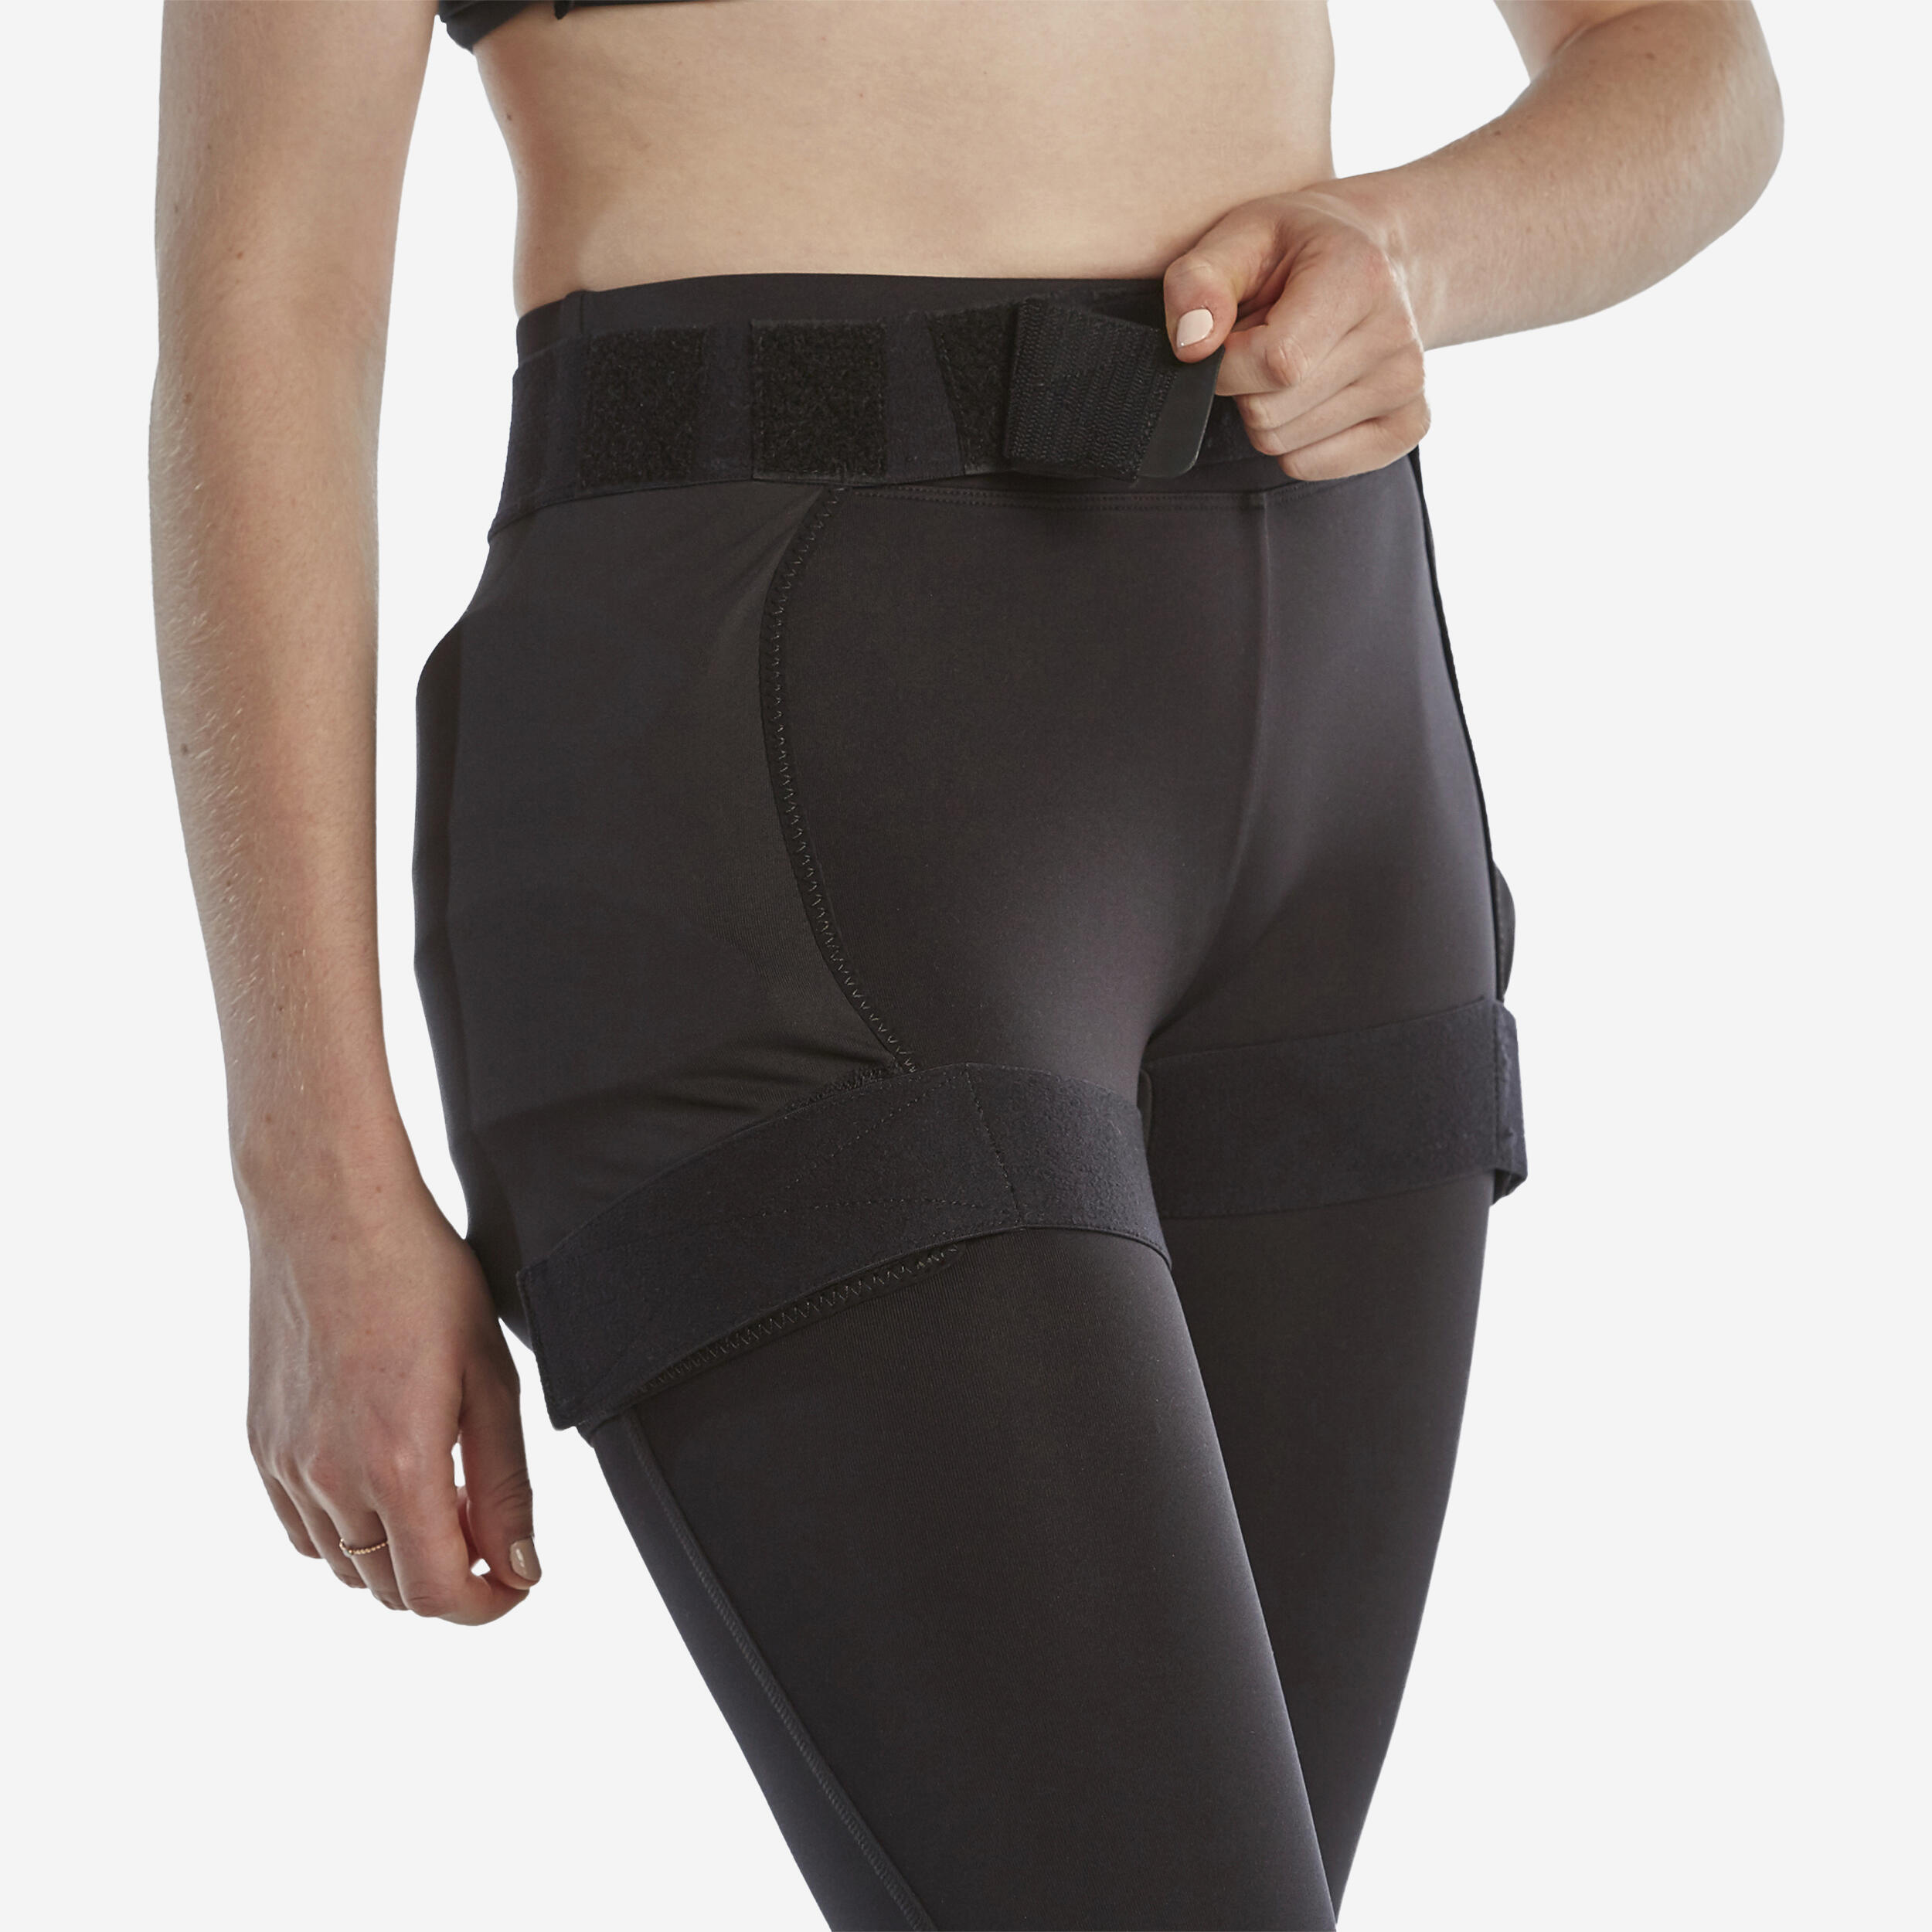 AXELYS Removable Protective Figure Skating Shorts